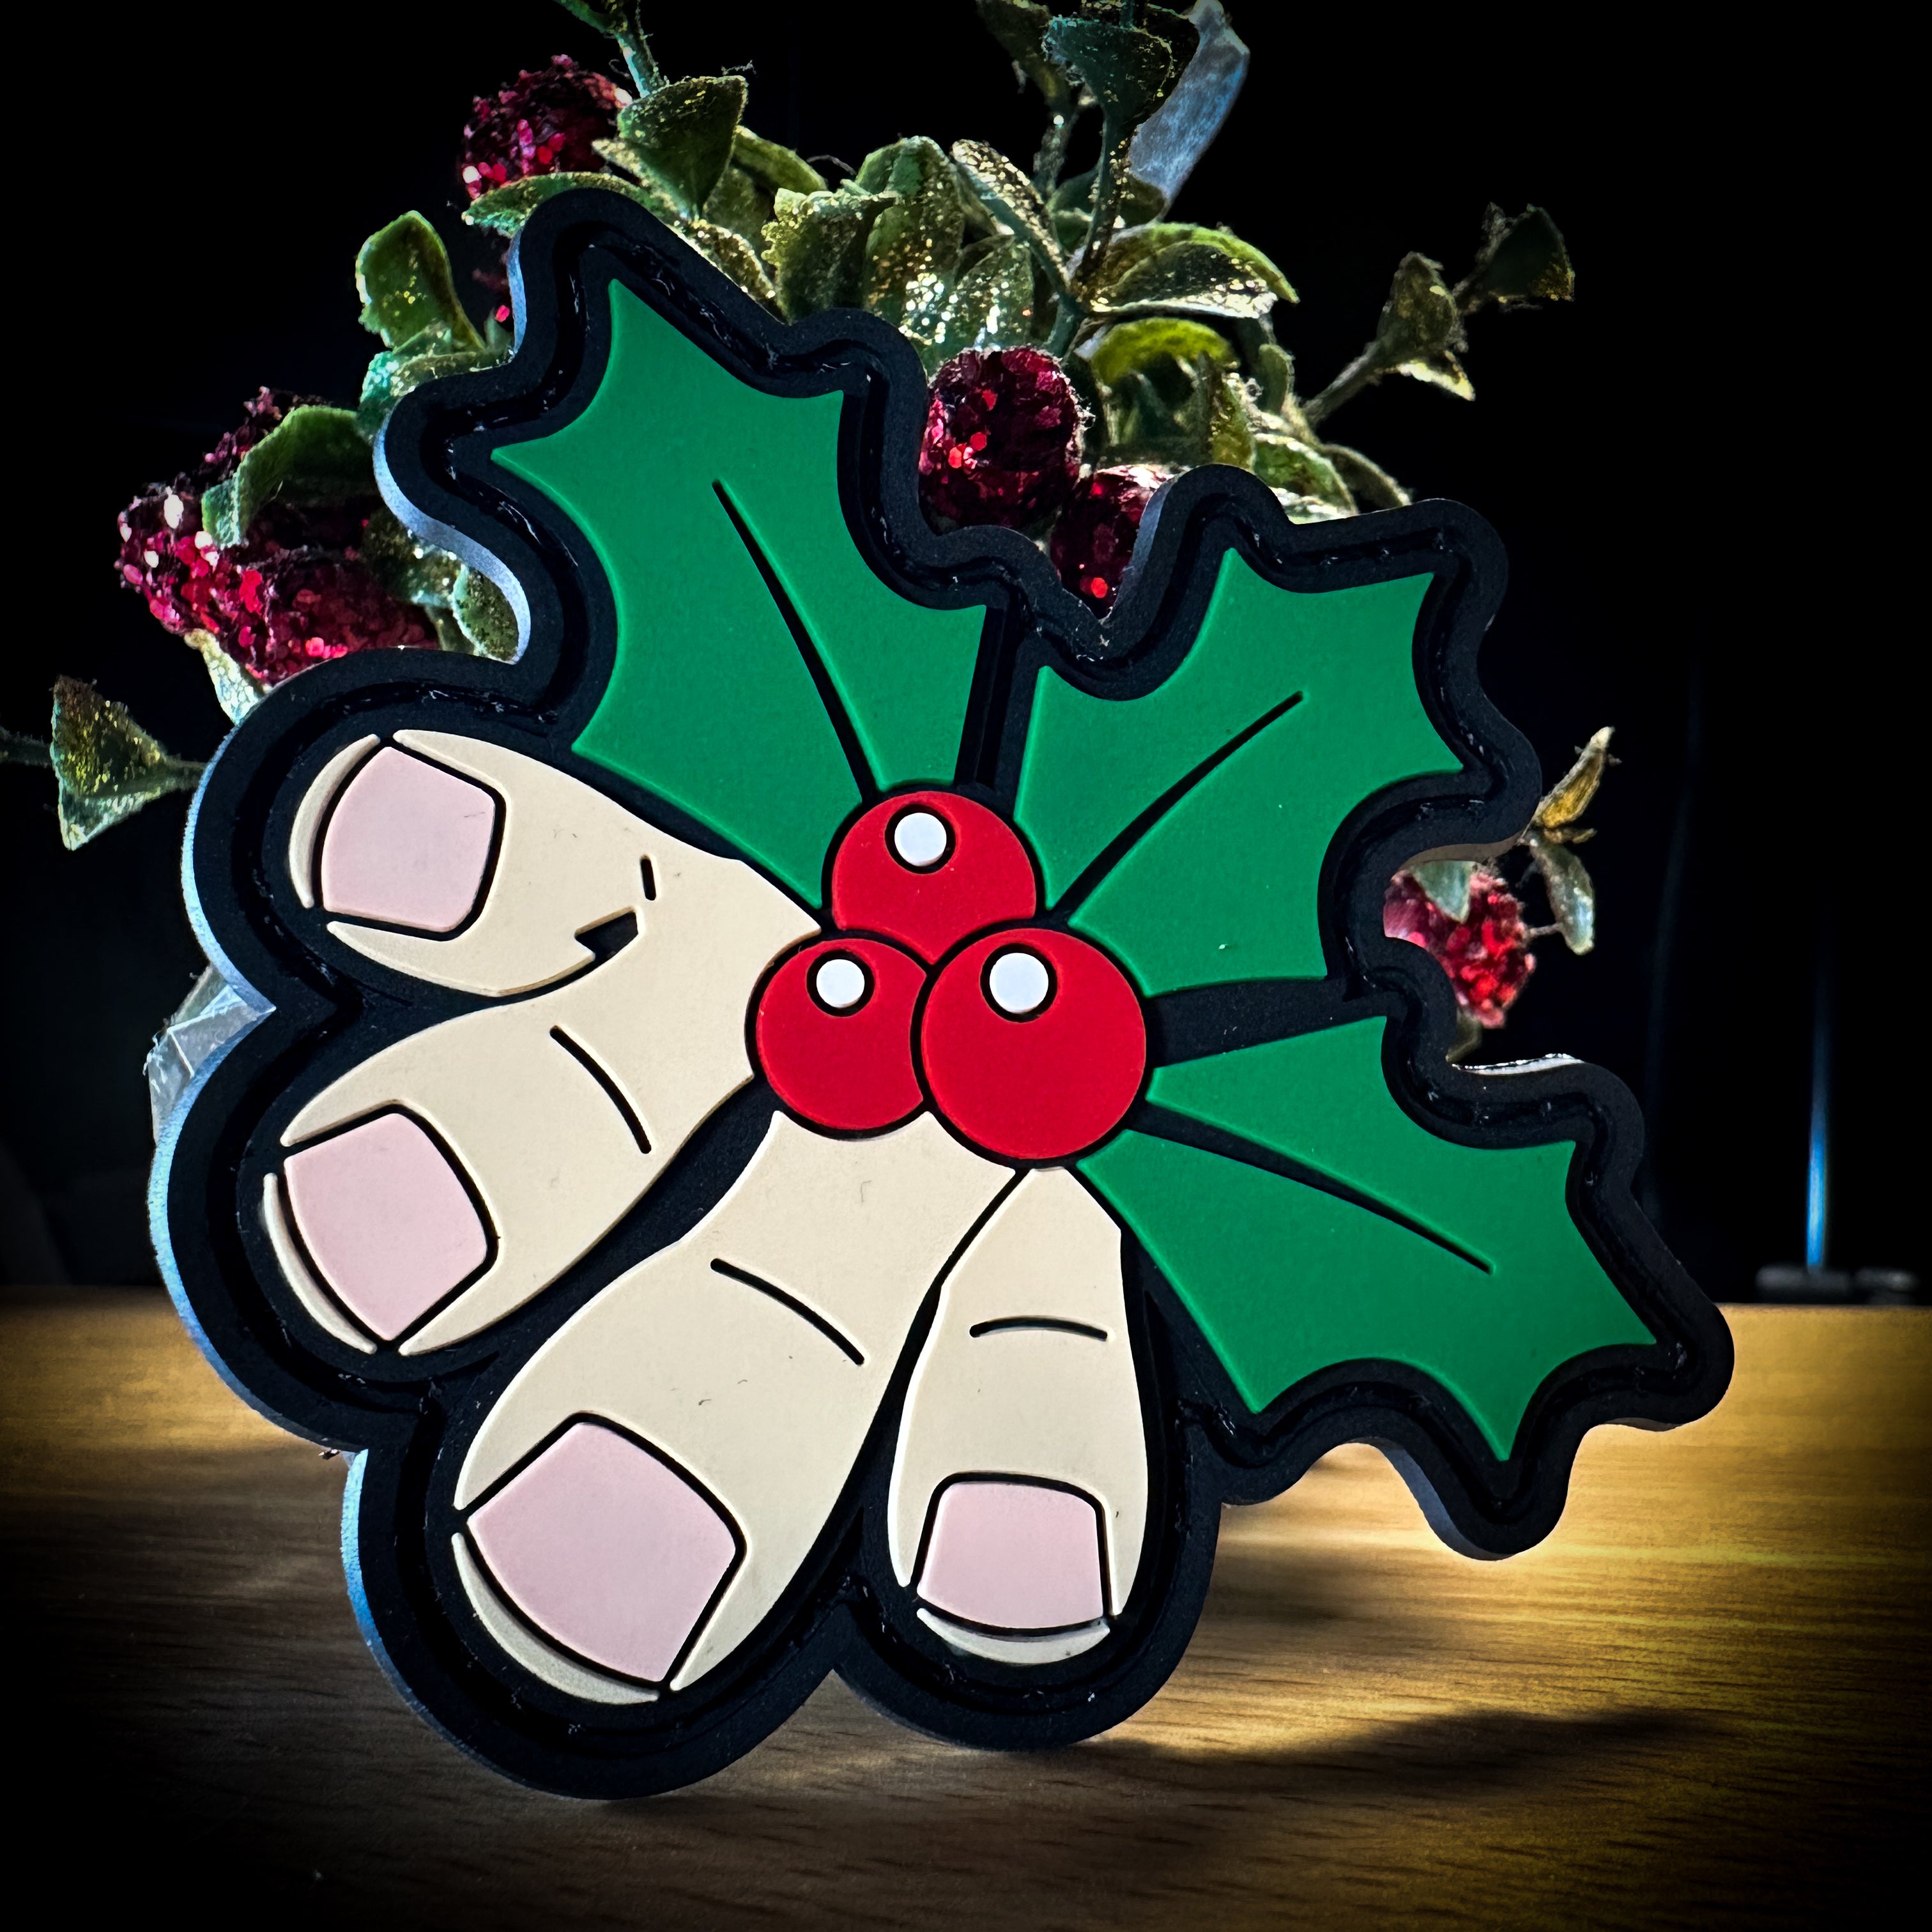 Toe-tally Festive: Mistle Toes PVC Patch - Step into the Holiday Spirit!